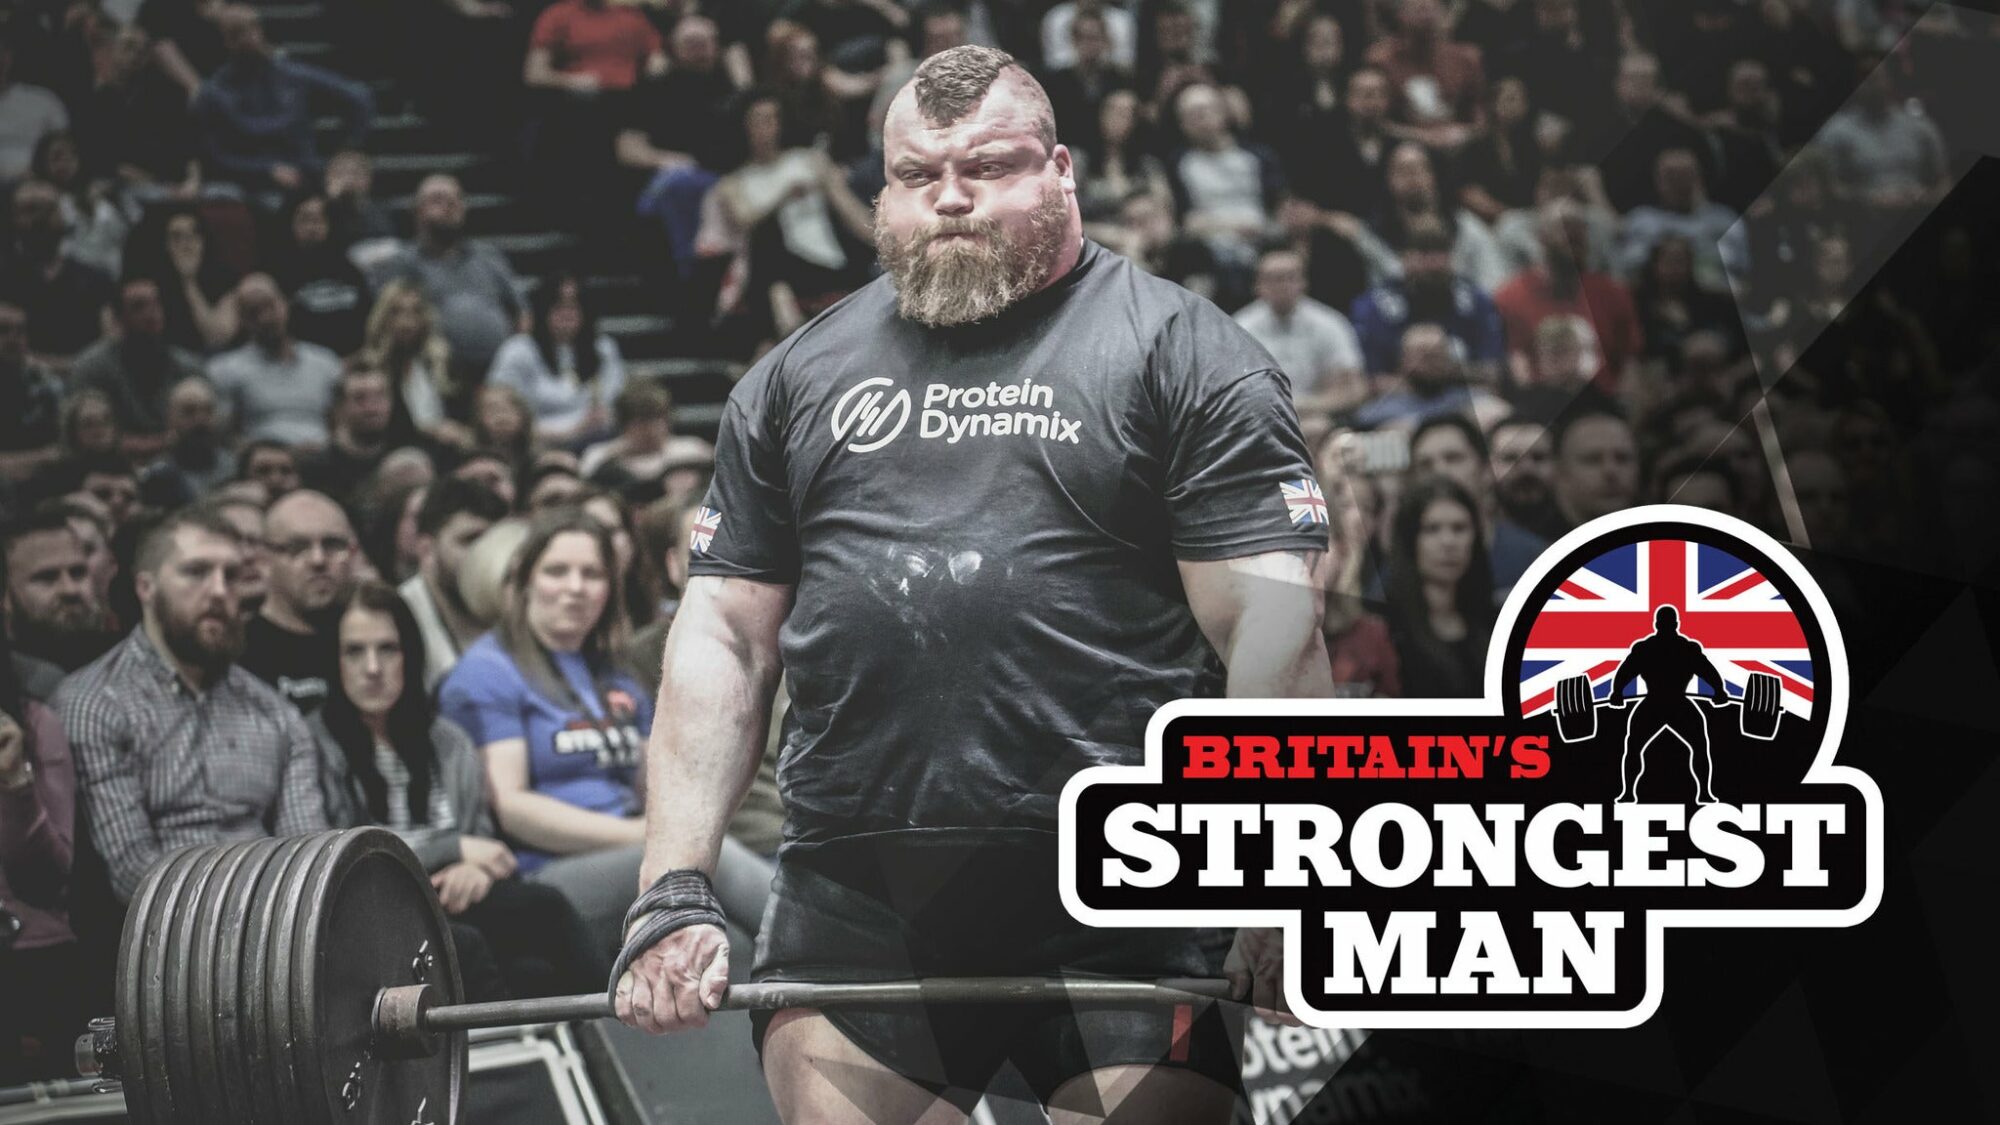 Image name Britains Strongest Man Hospitality Experiences at Utilita Arena Sheffield Sheffield the 18 image from the post Events in Yorkshire.com.